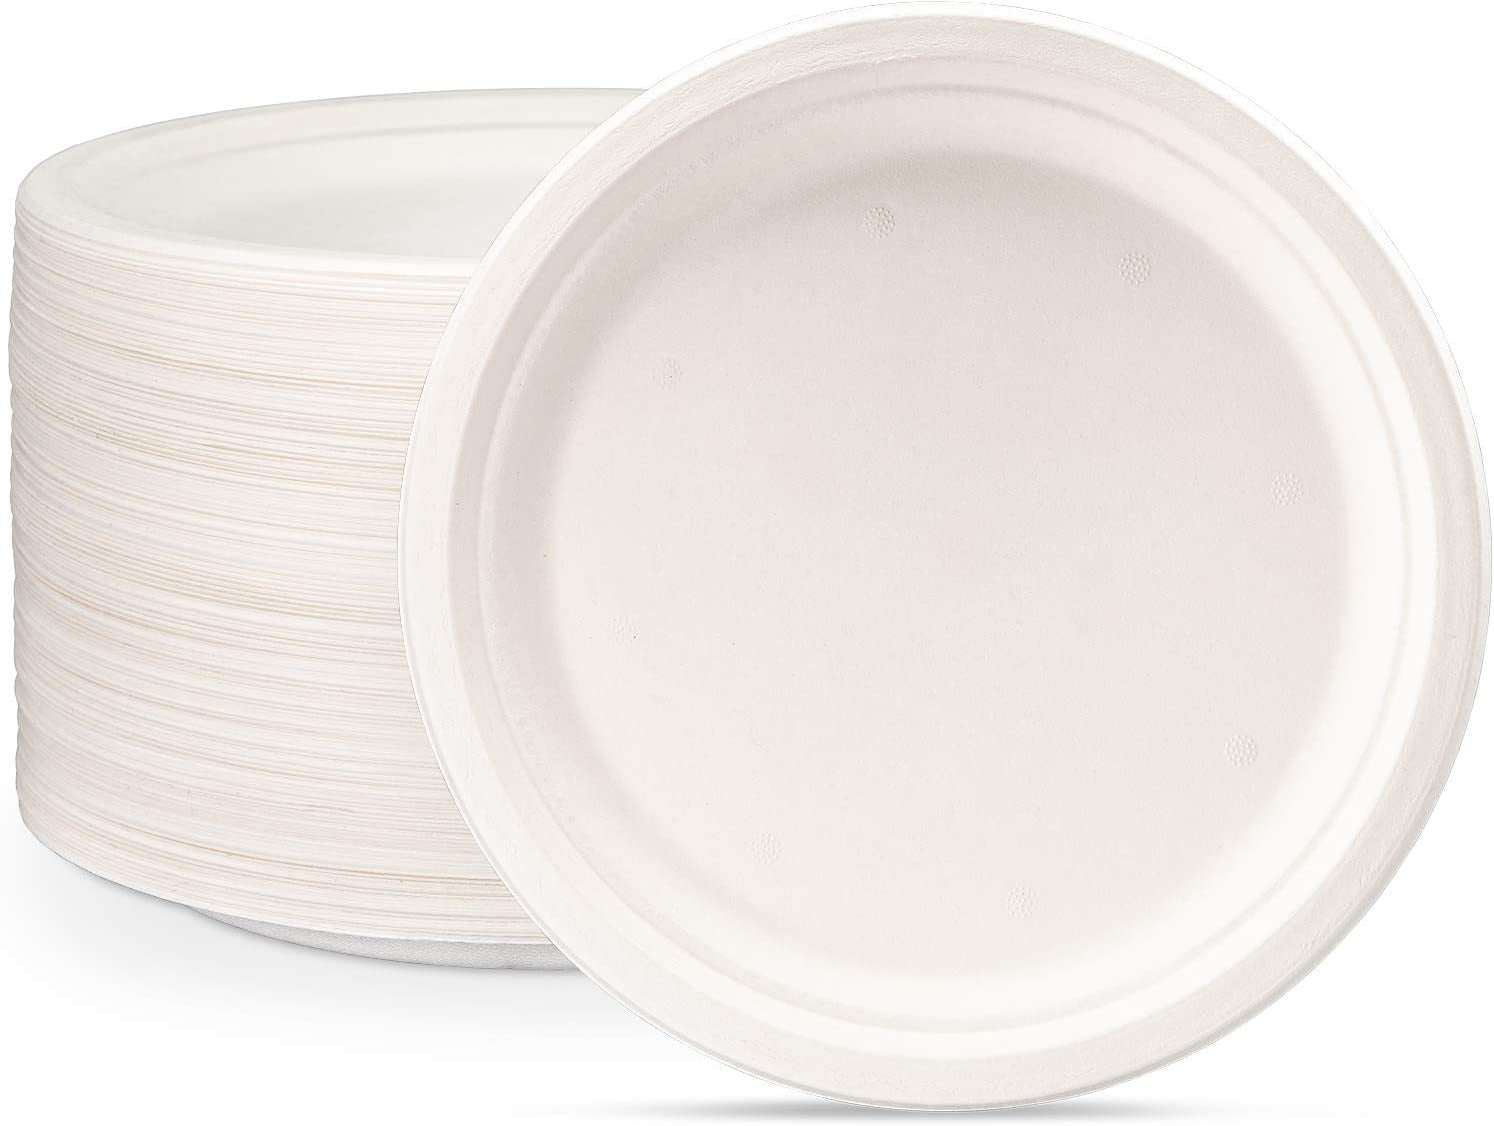  Isa&Bell Good Home Products 10 (125-Pack) Paper Plates  Eco-friendly - Biodegradable Paper Plates - Compostable Paper Plates :  Health & Household